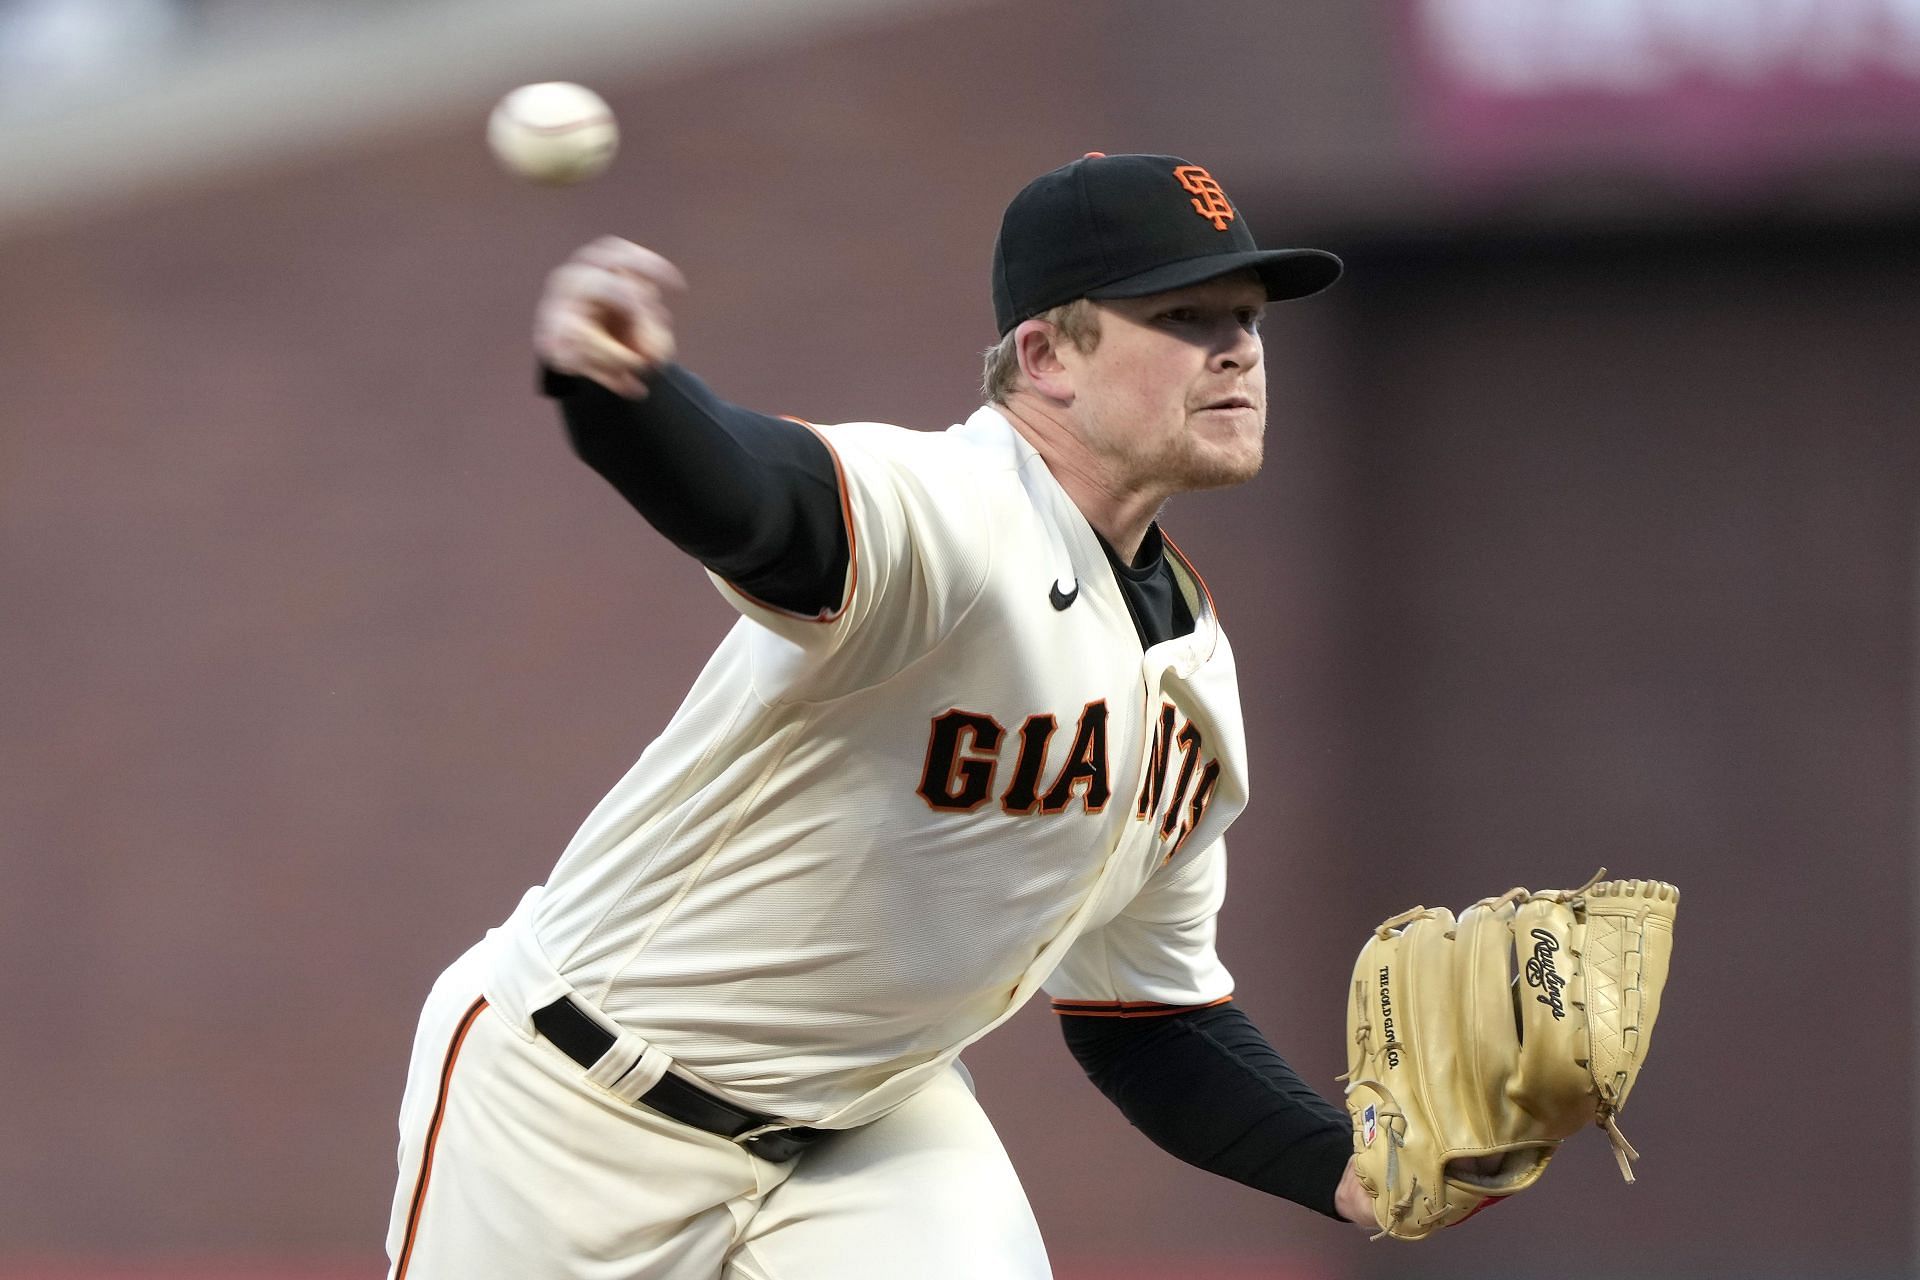 I think Logan's confidence level shot up last year - San Francisco Giants  manager Gabe Kapler believes 25-year-old pitcher will build on breakthrough  2021 season